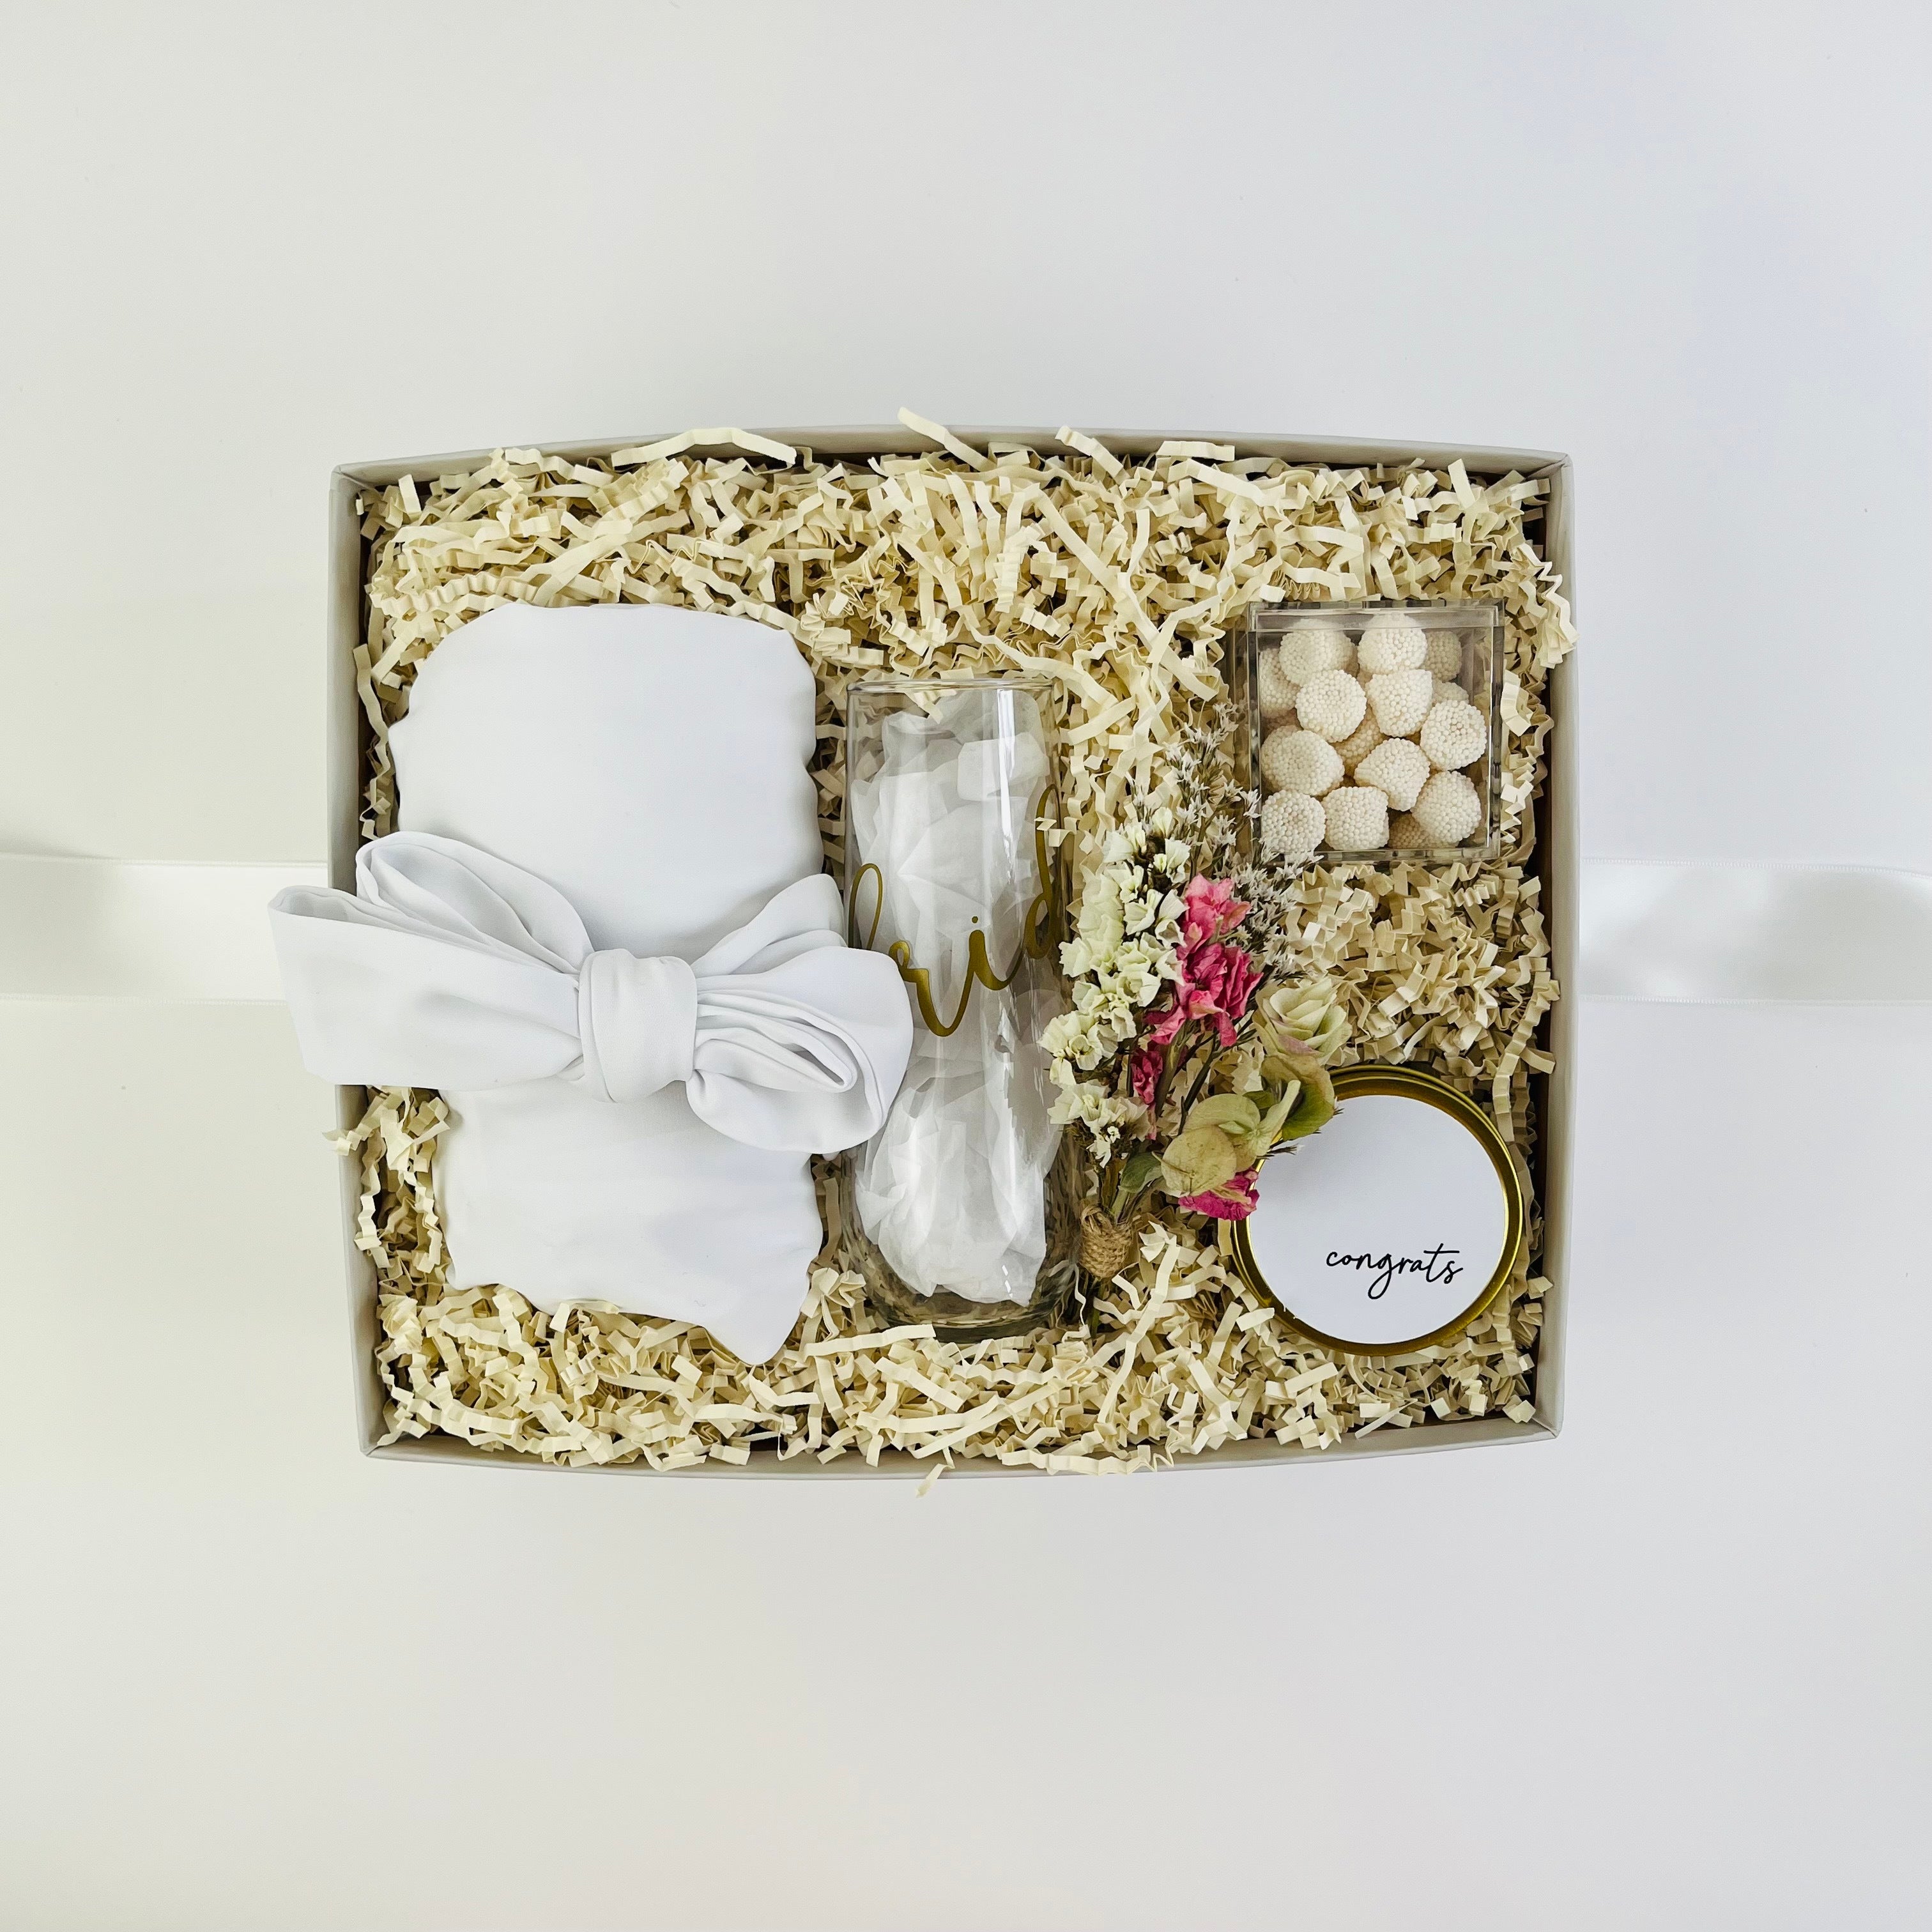 Curated Gift Boxes & Personalized Gifts - Foxblossom Co.